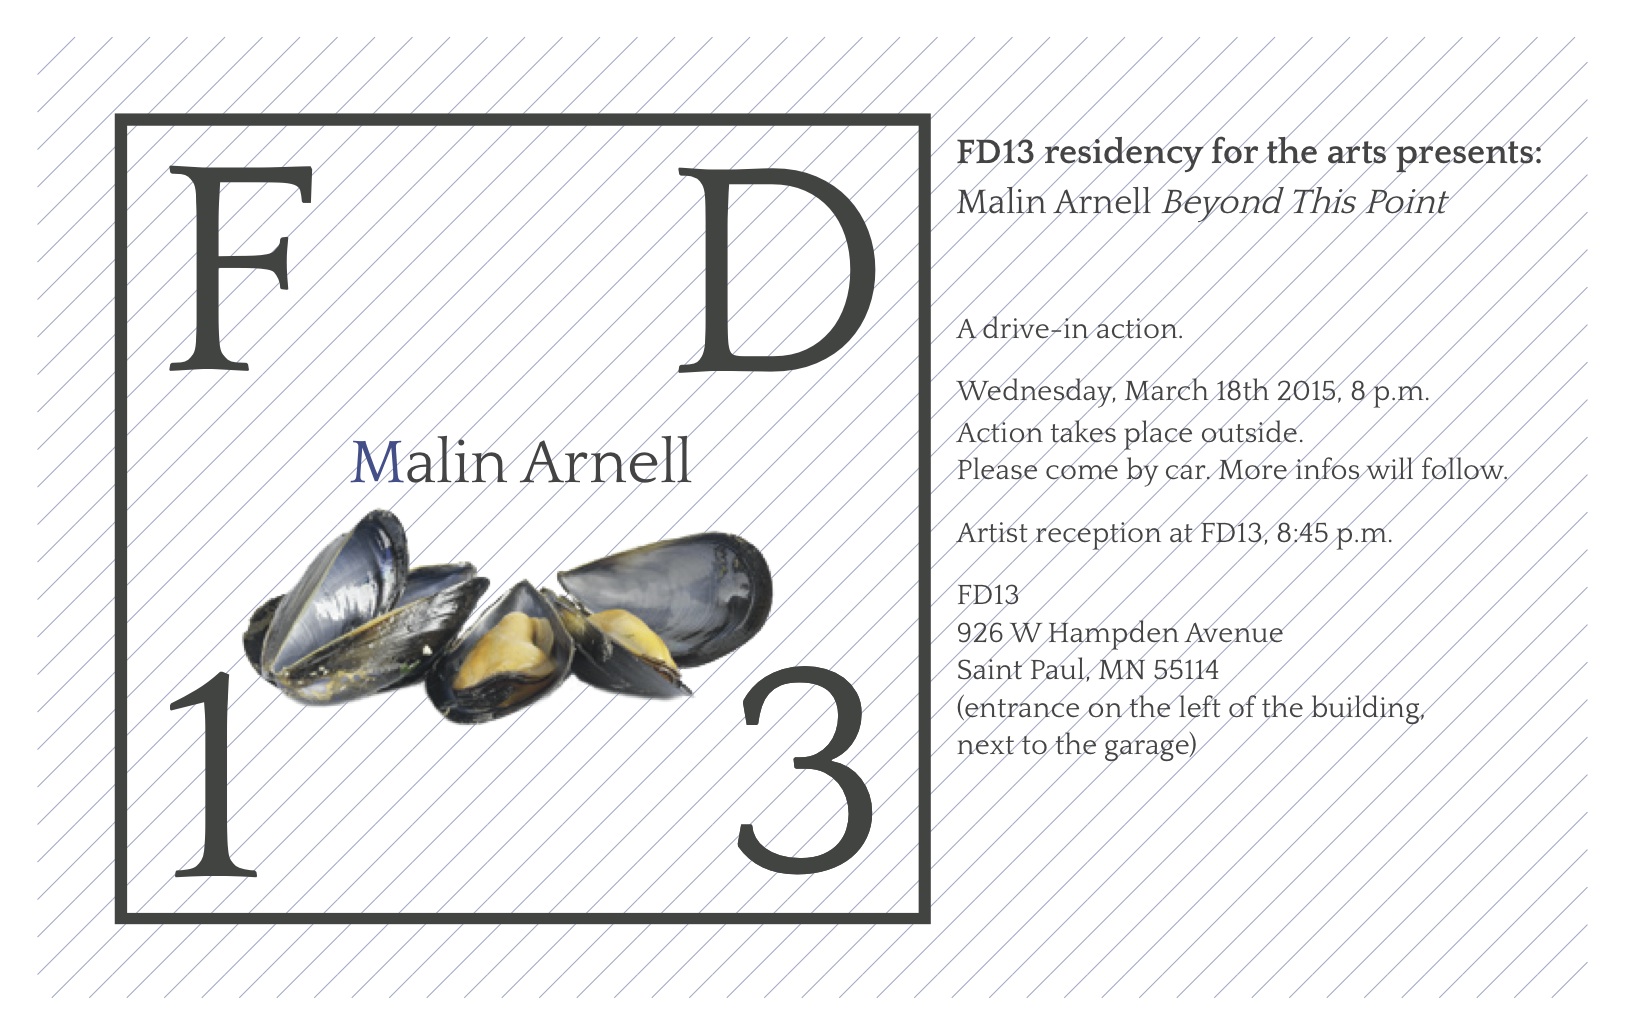 FD13 residency for the arts presents: Malin Arnell. Beyond This Point. 18 March 2015, 8 p.m.